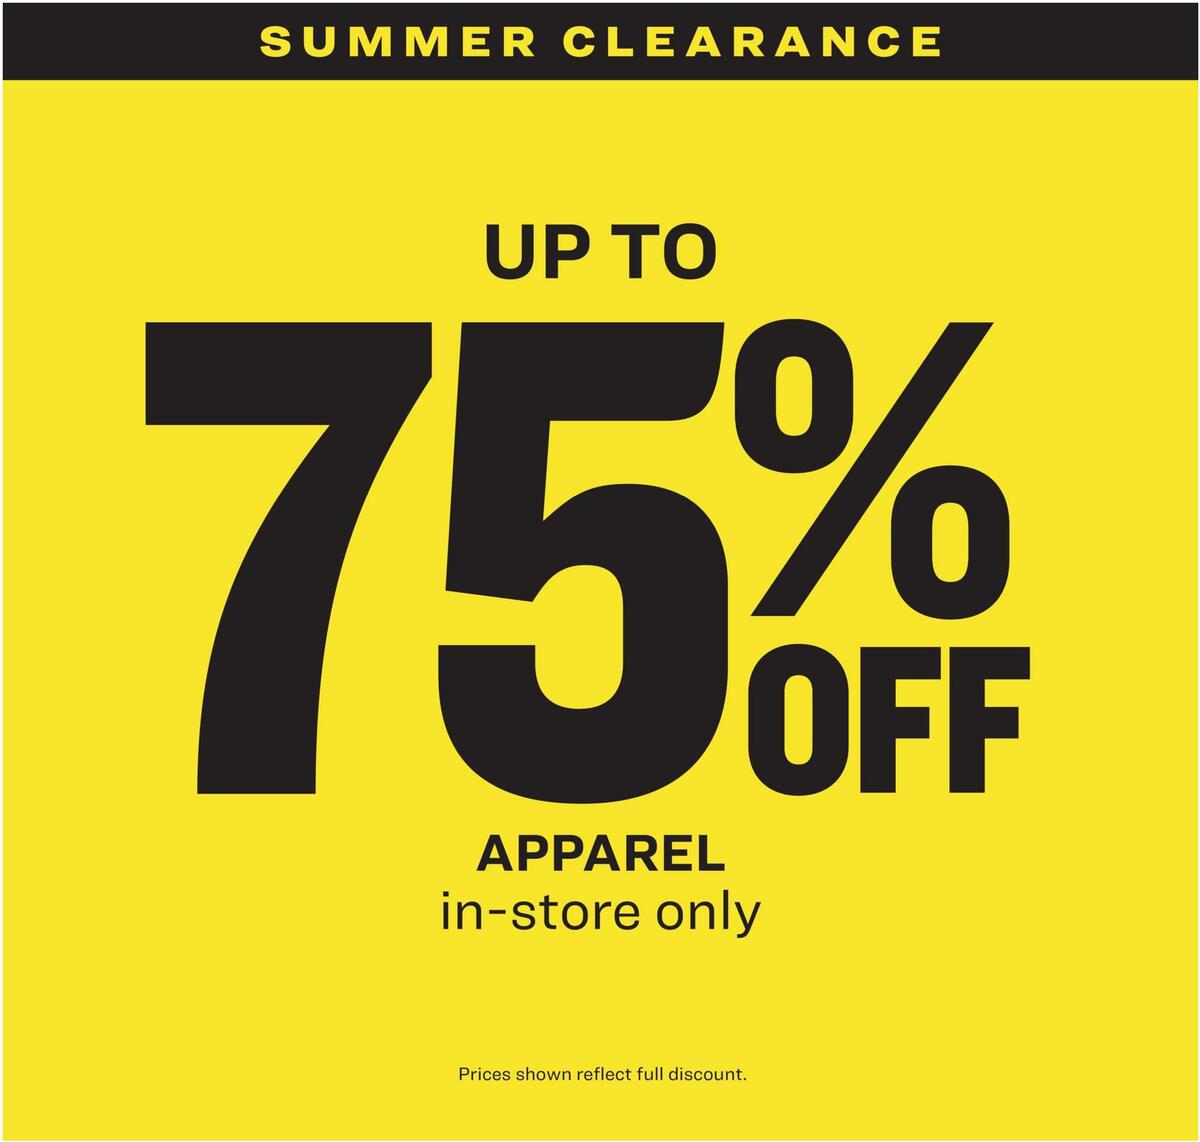 Academy Sports + Outdoors Back to Sport Ad Weekly Ad from July 13